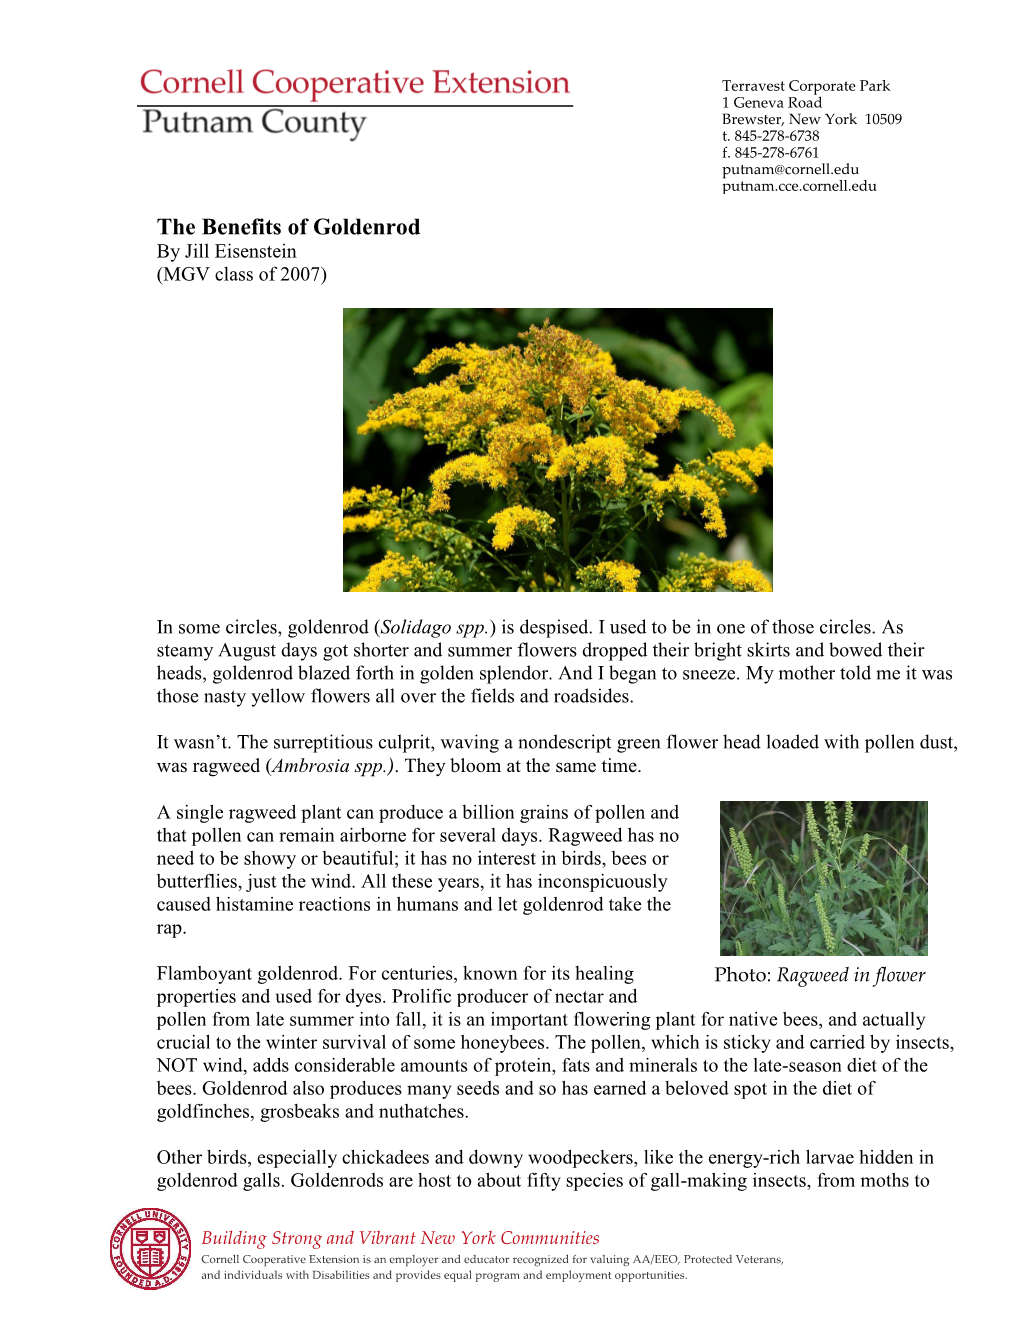 The Benefits of Goldenrod by Jill Eisenstein (MGV Class of 2007)